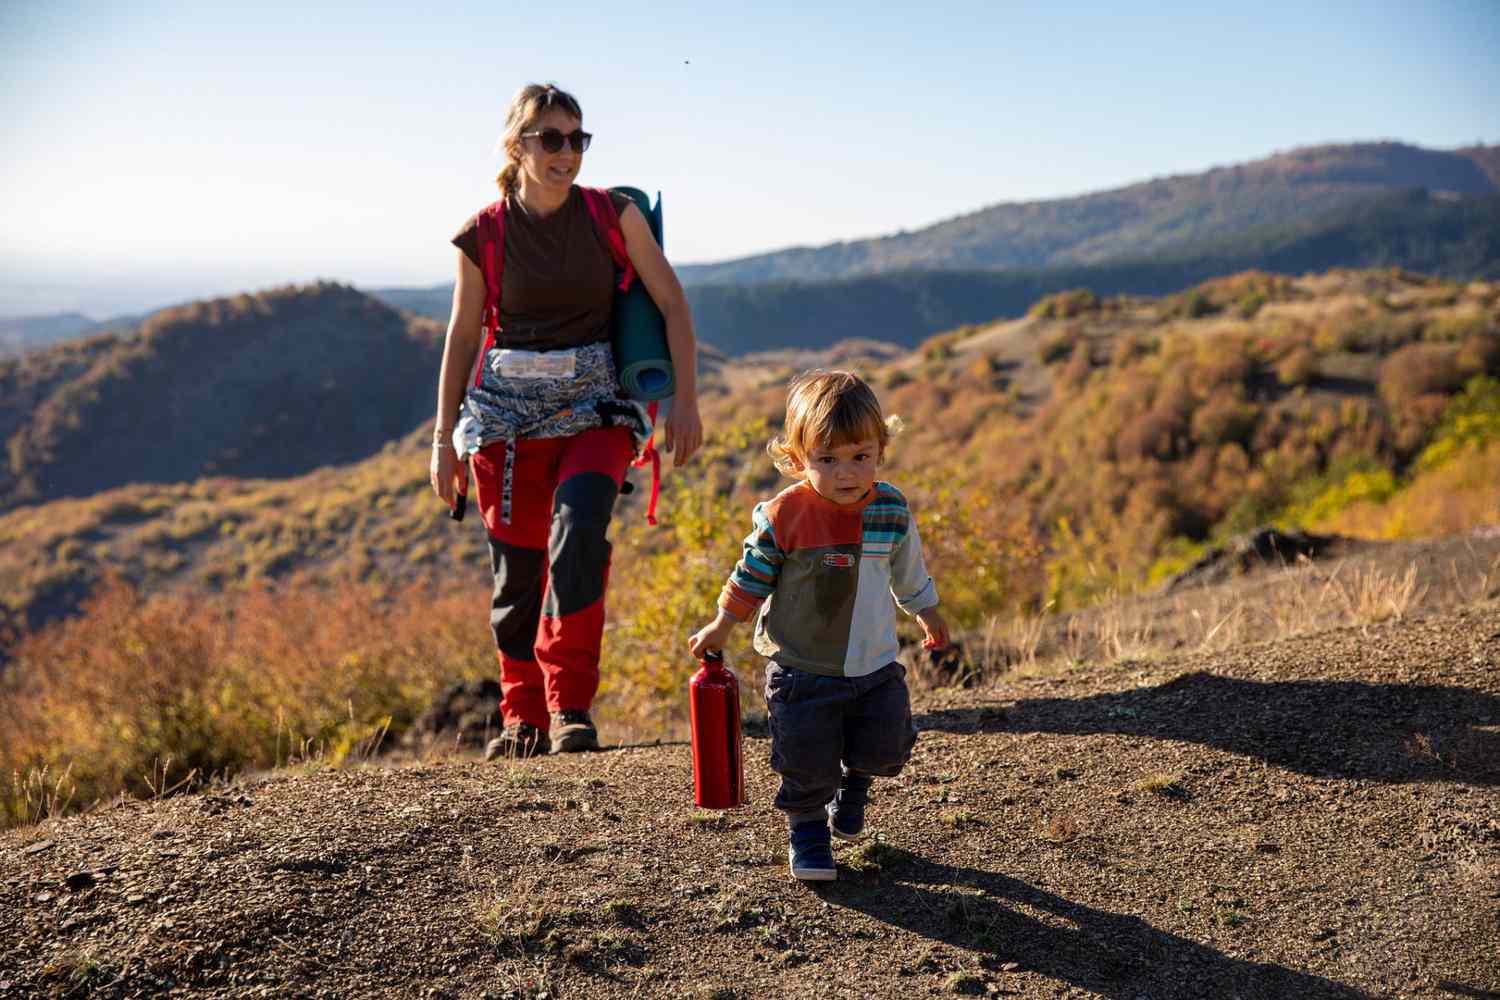 An image of a mom and her child walking in the mountains during autumn.